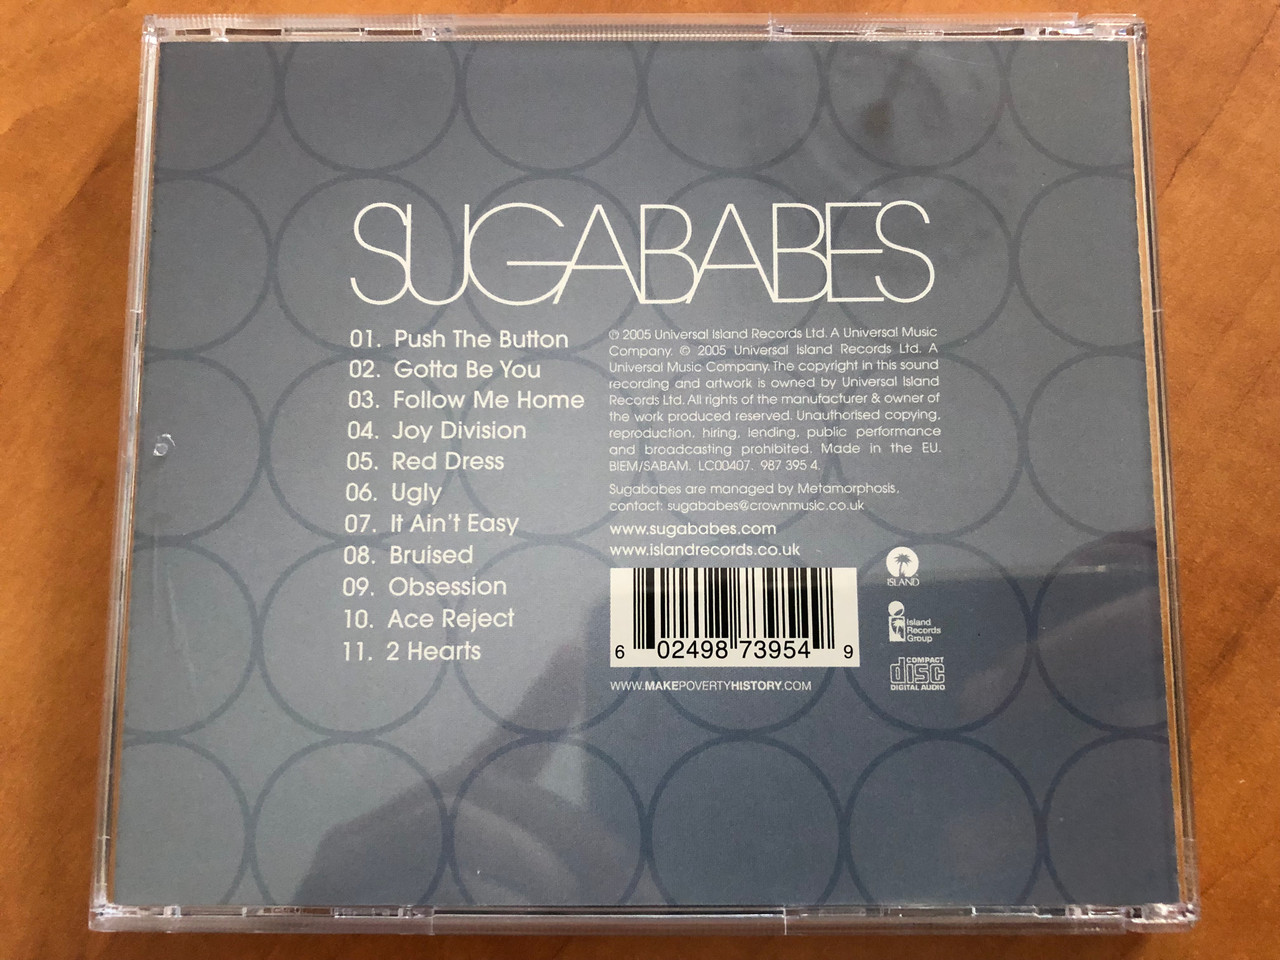 https://cdn10.bigcommerce.com/s-62bdpkt7pb/products/30767/images/181670/Sugababes_Taller_In_More_Ways_Island_Records_Audio_CD_2005_987_395_4_7__94676.1623827681.1280.1280.JPG?c=2&_ga=2.234906625.1829284140.1623917769-62128686.1623917769